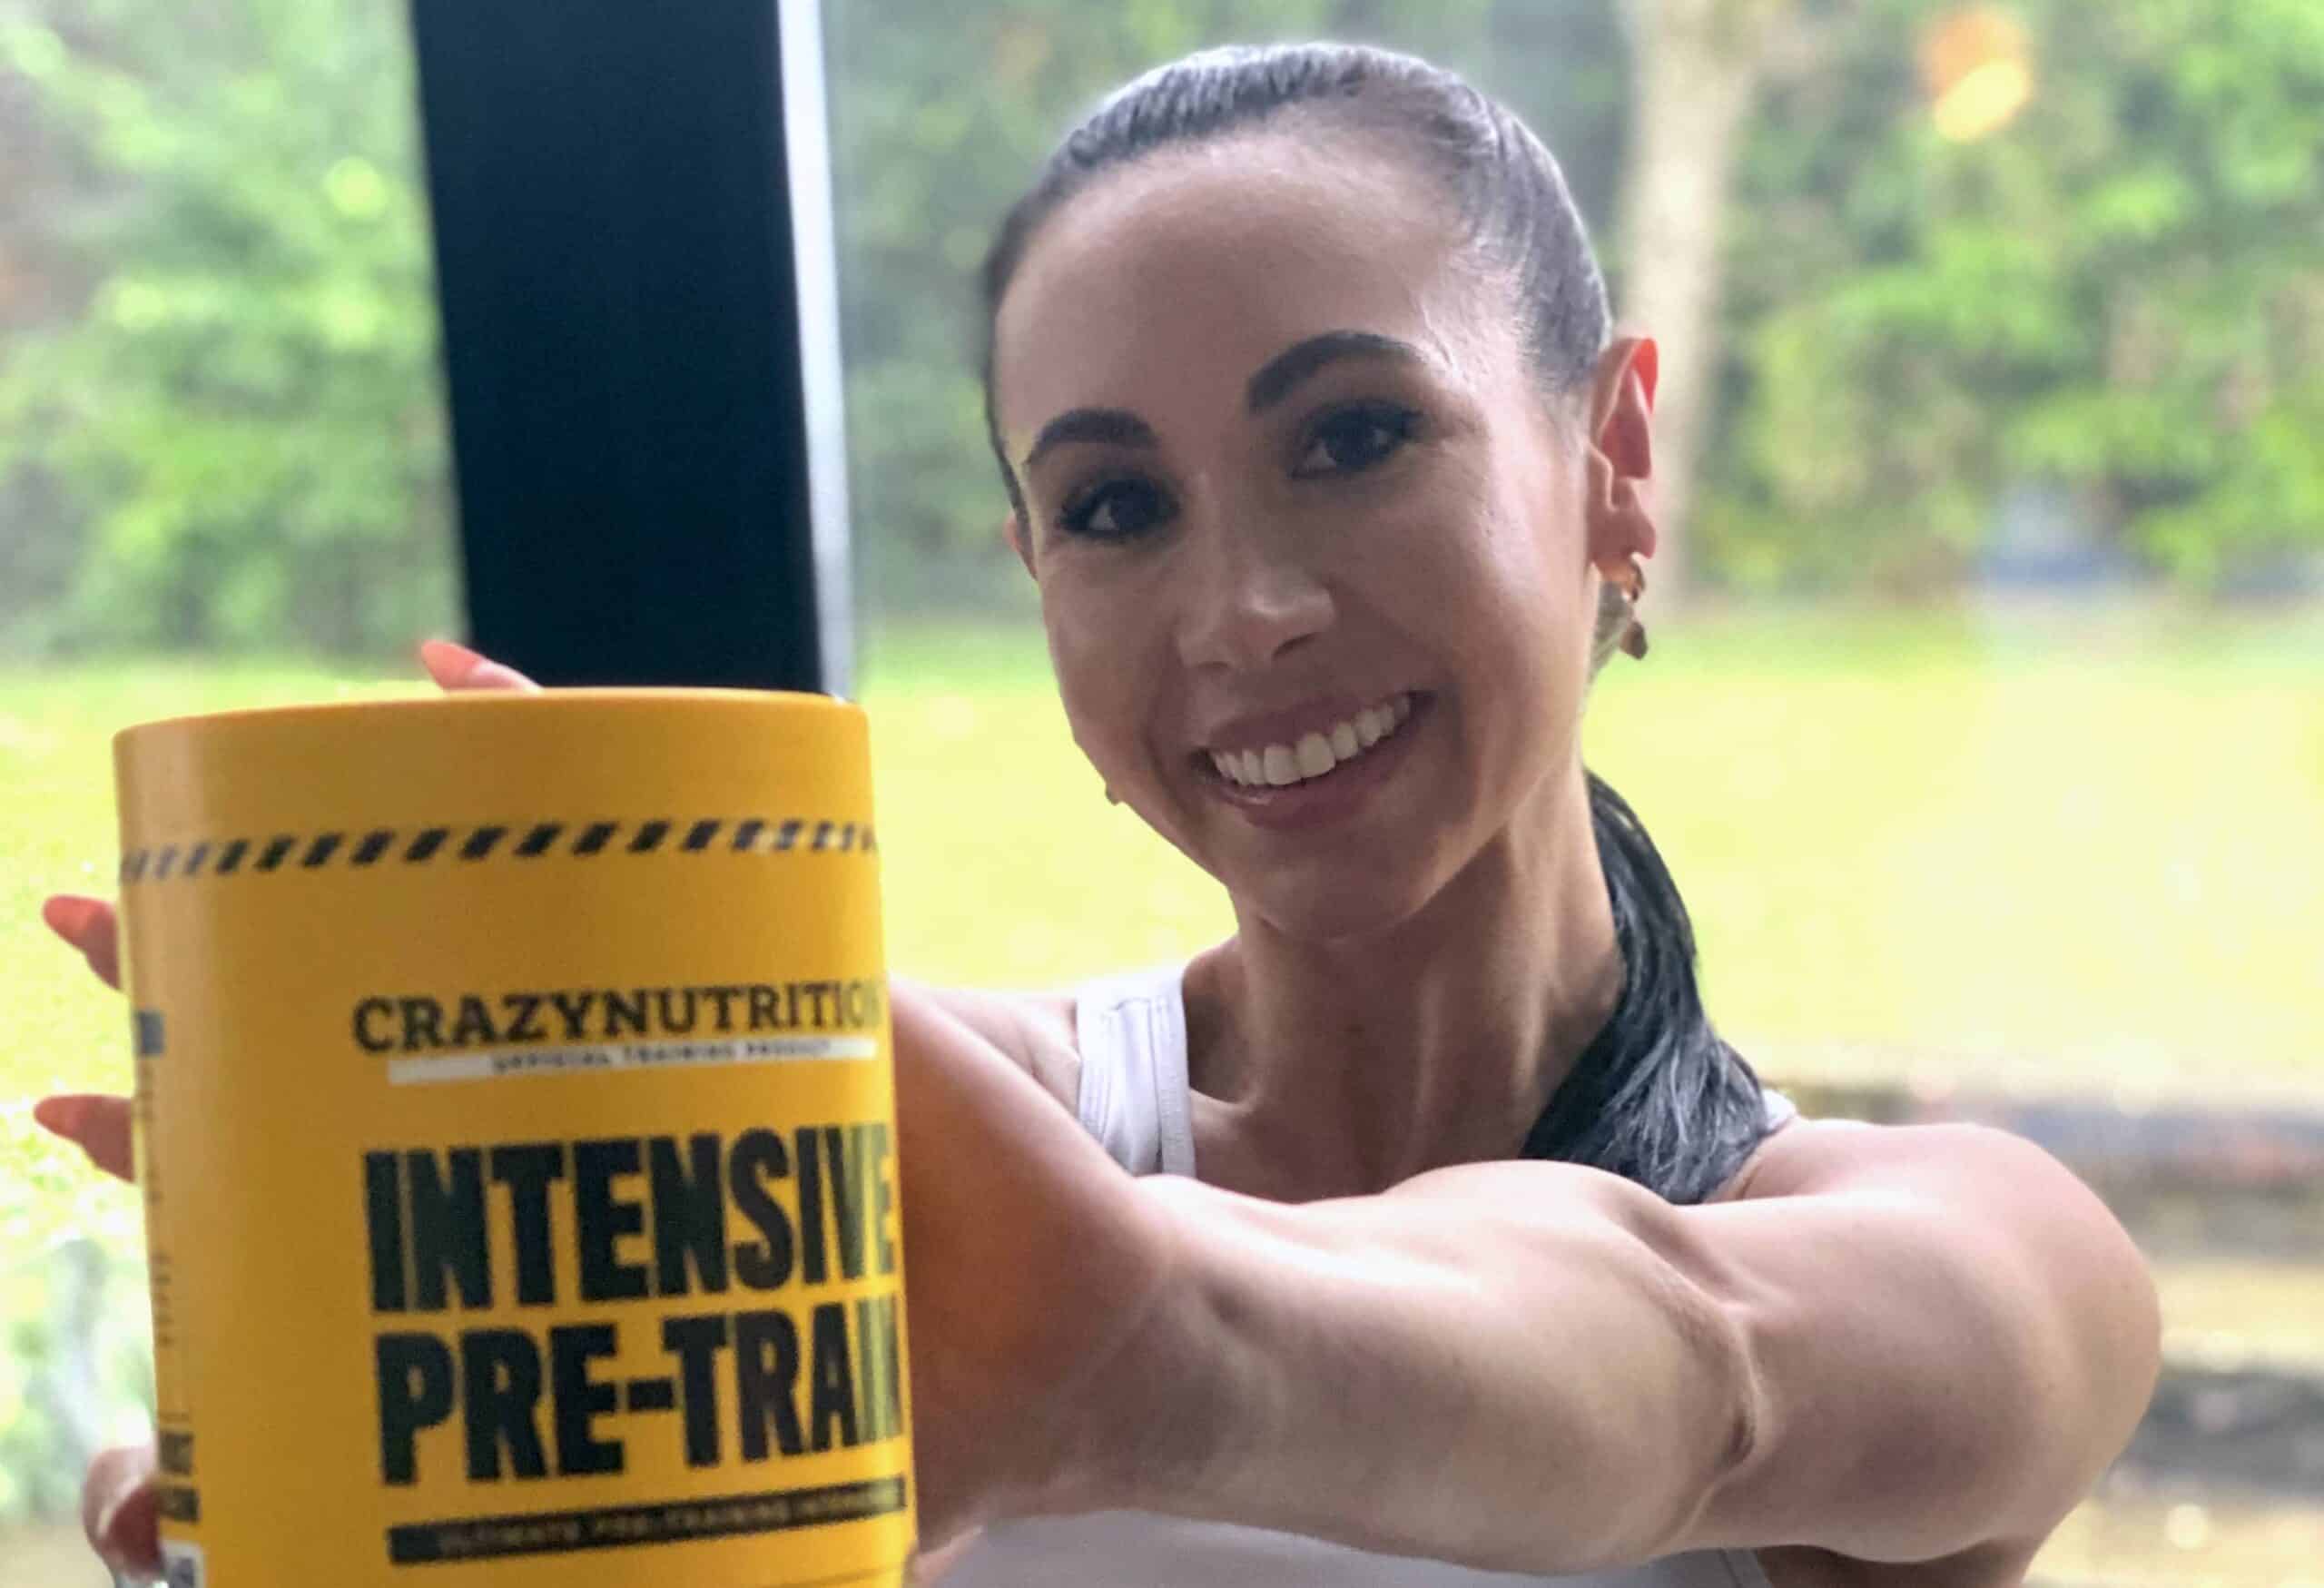 Fit woman holds crazy nutrition supplement